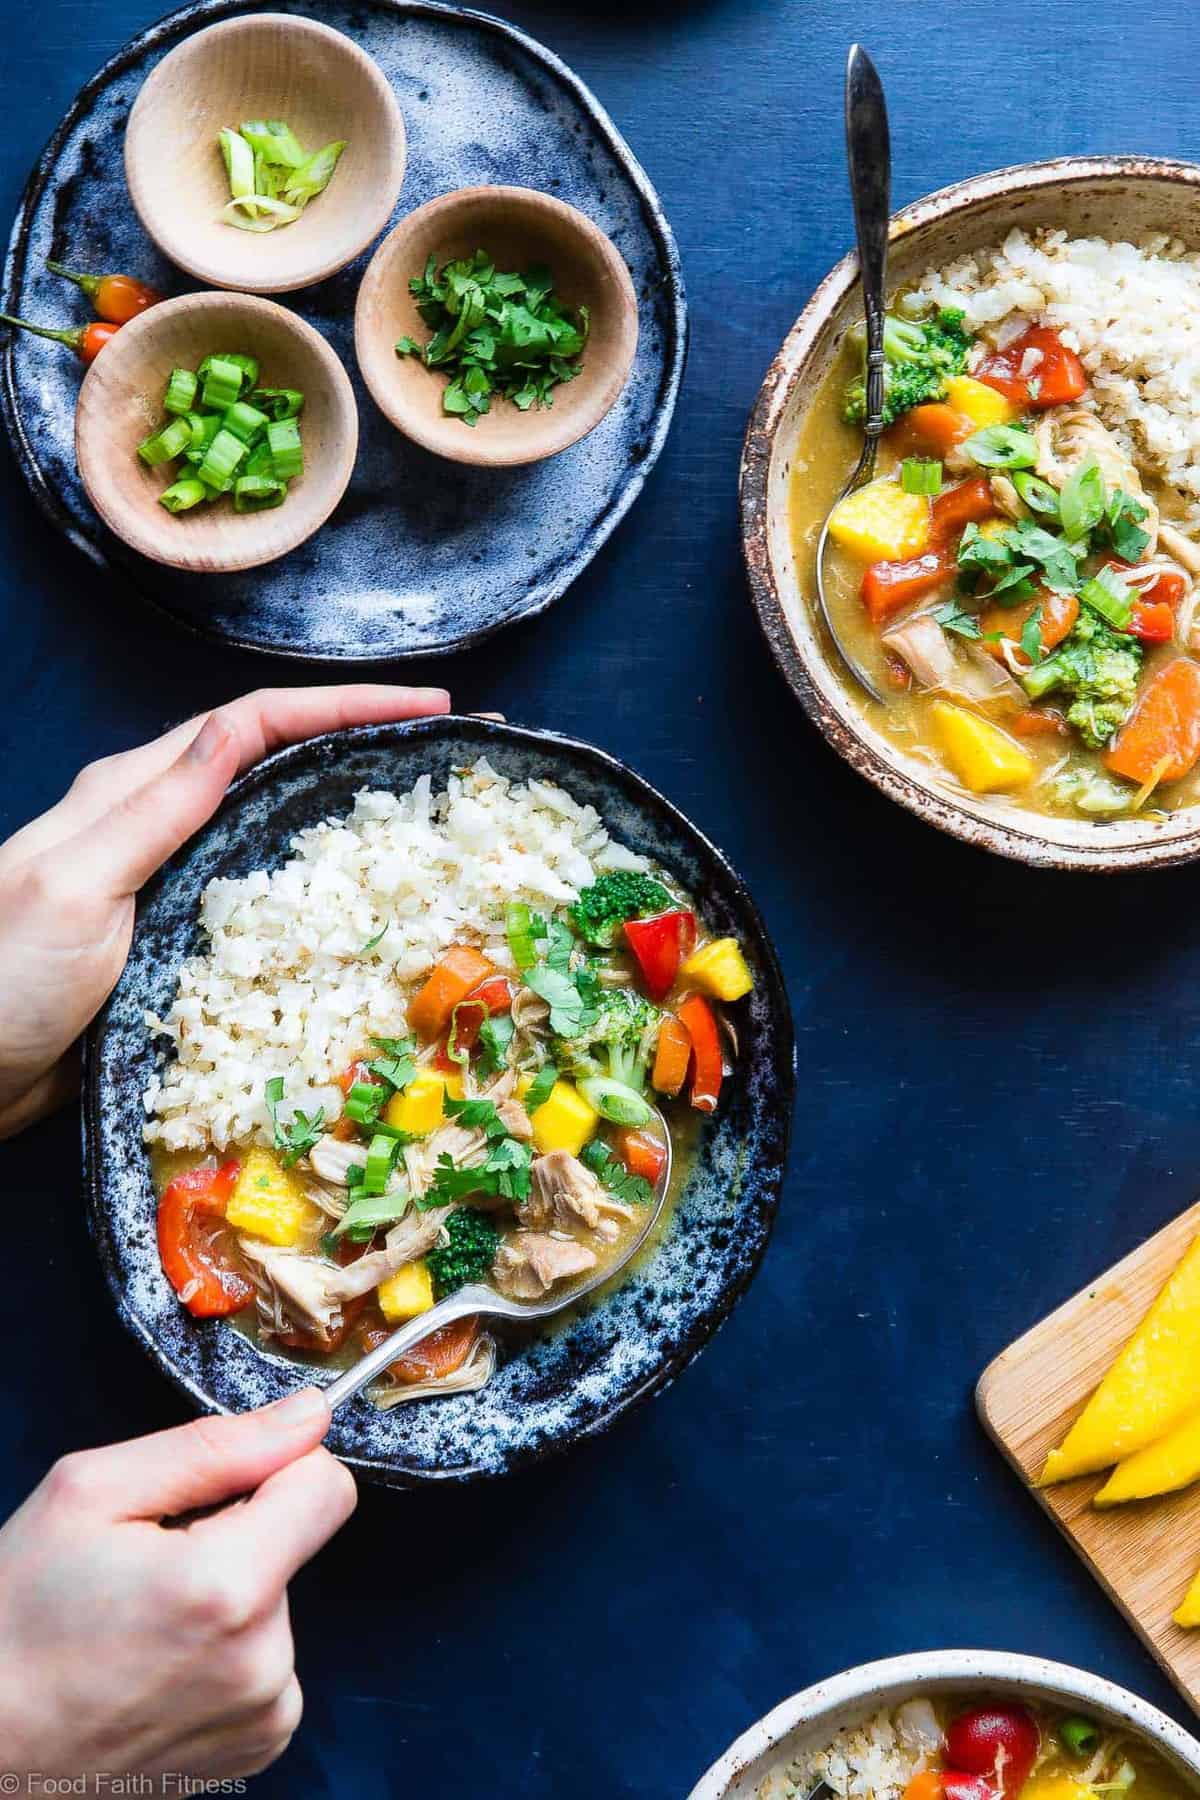 Whole30 Slow Cooker Mango Chicken Curry- An easy, healthy family-friendly weeknight dinner where the slow cooker does all the work for you! Gluten free and paleo/whole30 compliant too! Makes DELICIOUS leftovers for meal prep! | #Foodfaithfitness | #Glutenfree #Healthy #Paleo #Whole30 #Curry